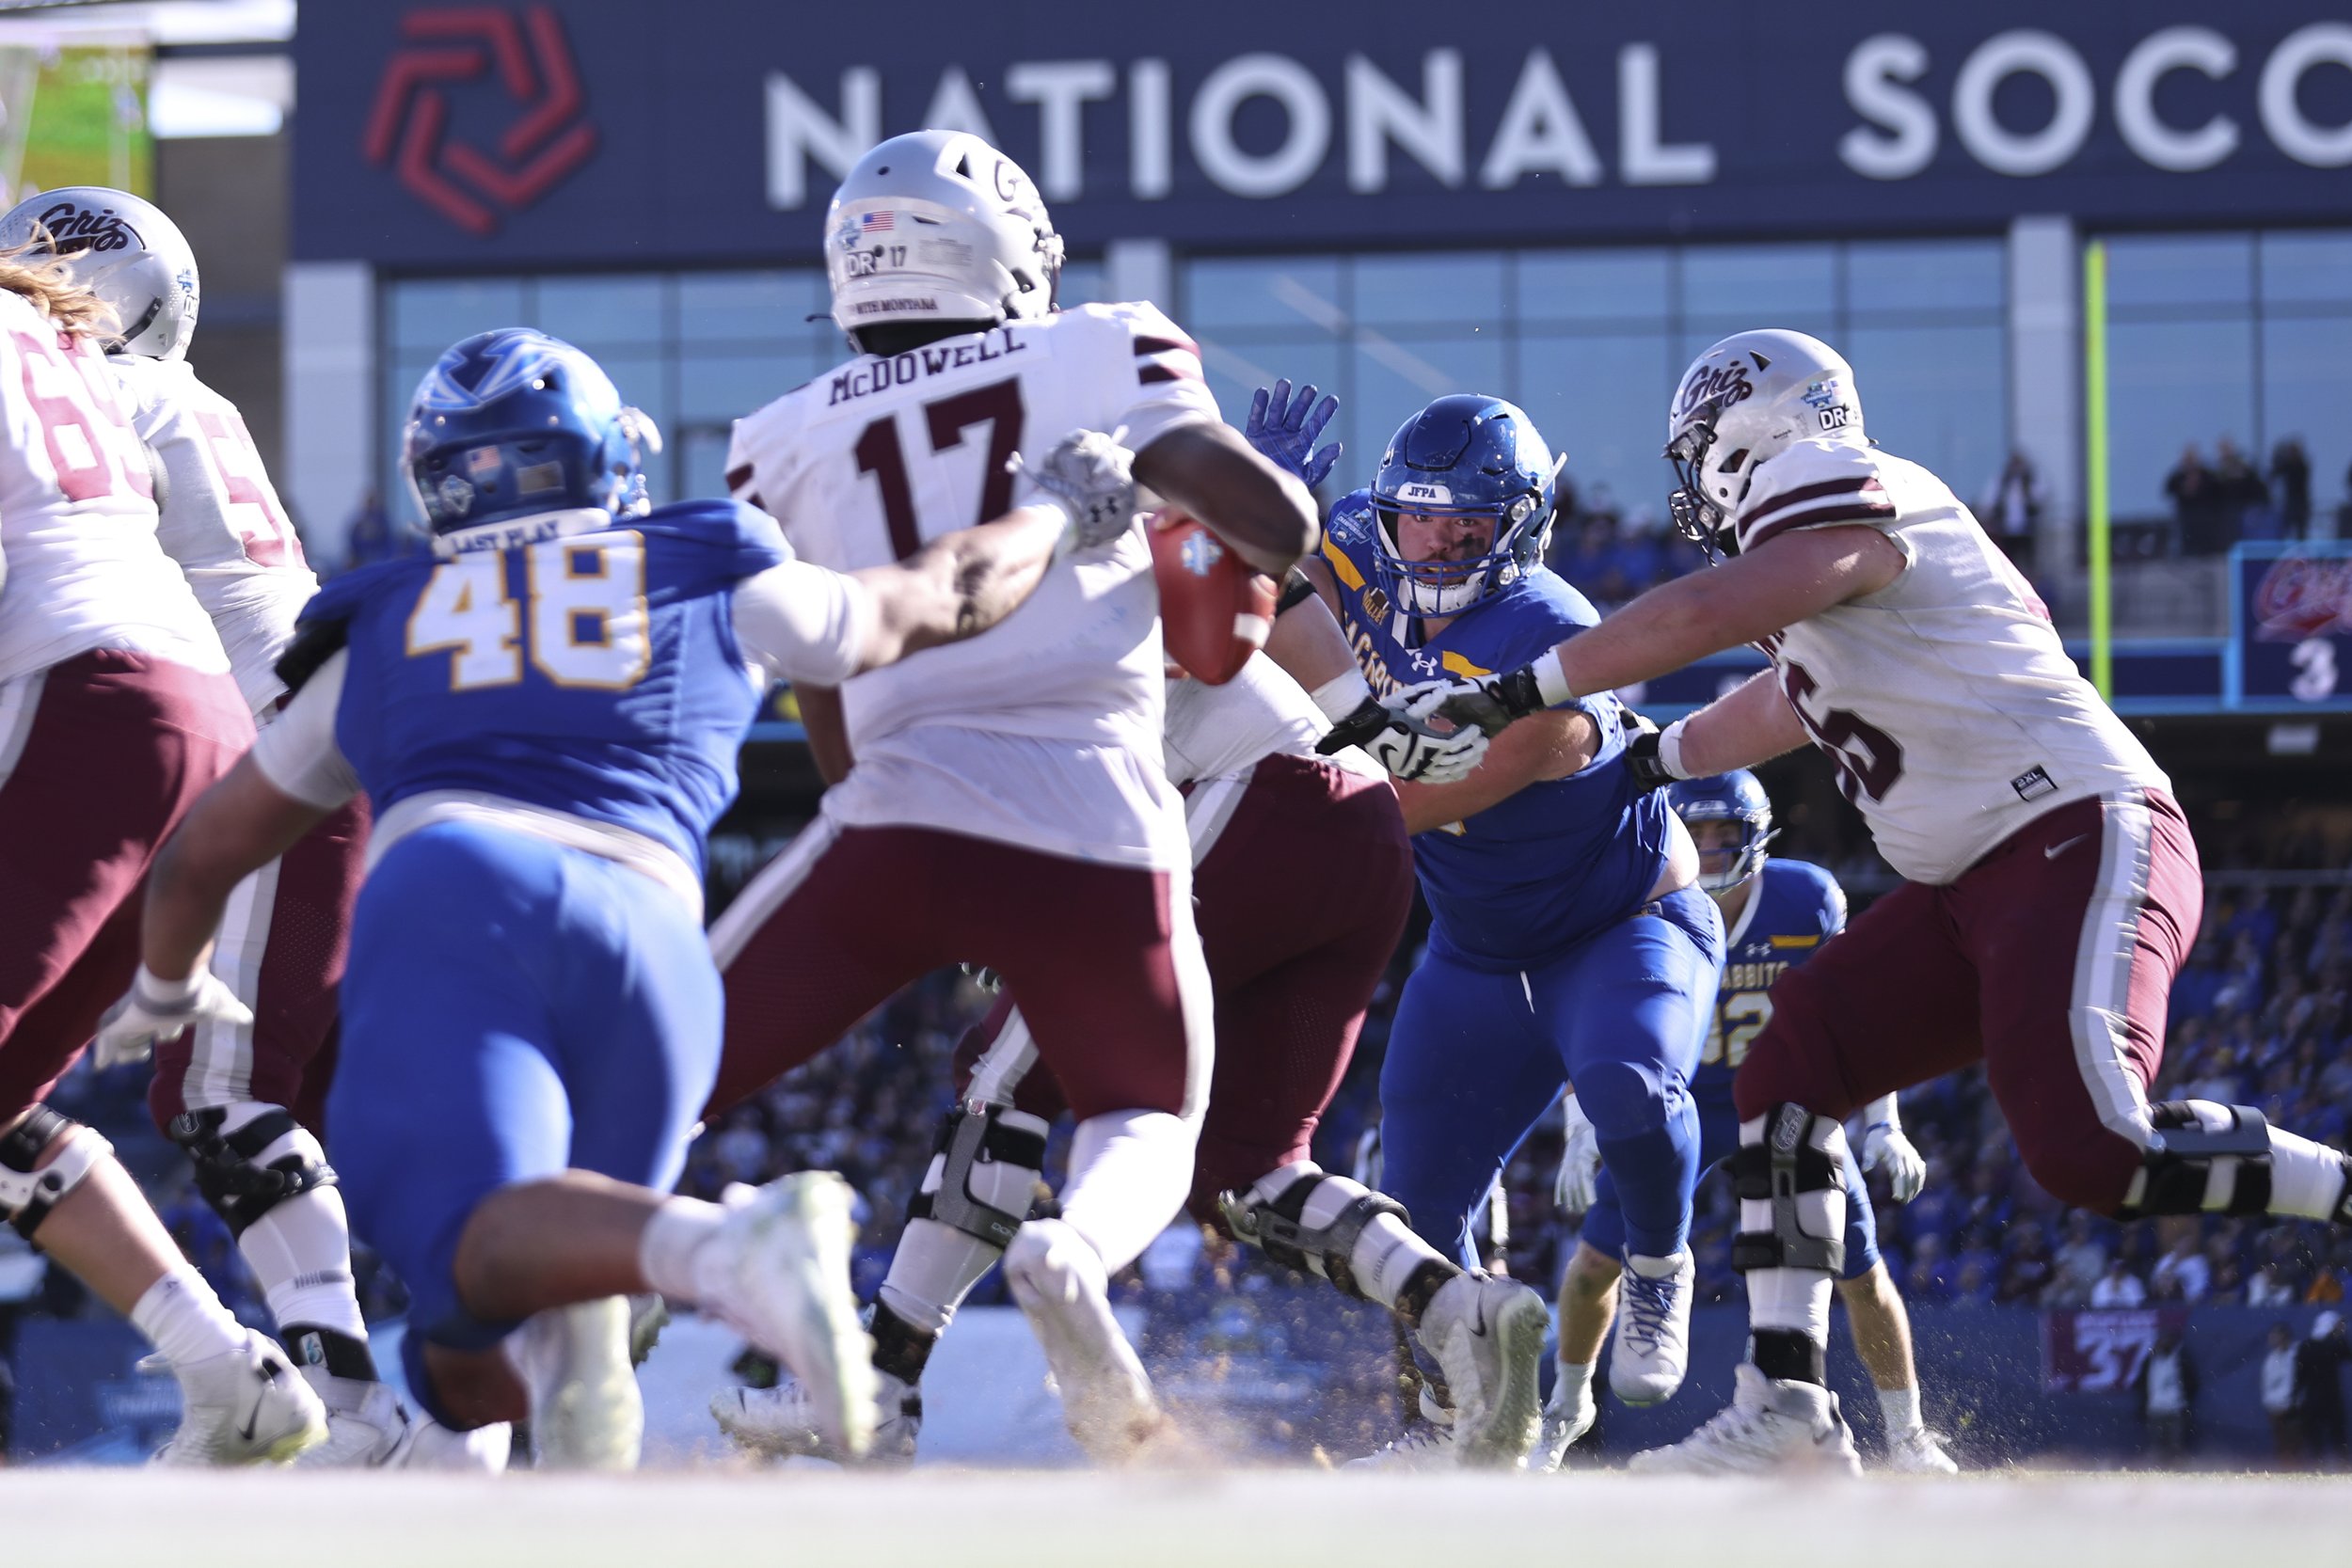  FRISCO, TEXAS - JANUARY 7: Aaron Wolfcale-Holsten #55 of the South Dakota State Jackrabbits battles against the Montana Grizzlies defense during the second half of the Division I FCS Football Championship held at Toyota Stadium on January 7, 2024 in